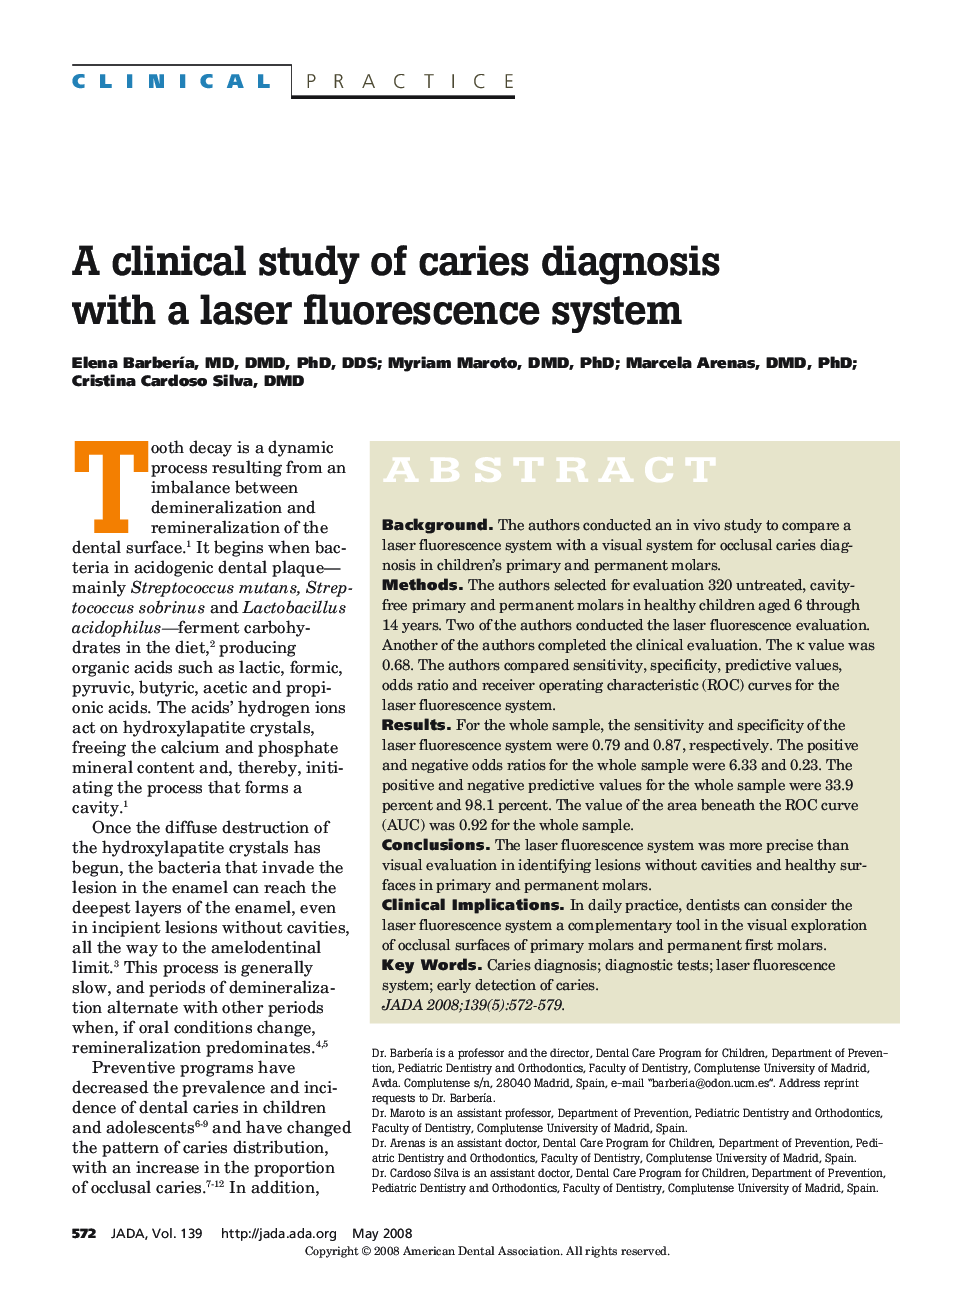 A Clinical Study of Caries Diagnosis With a Laser Fluorescence System